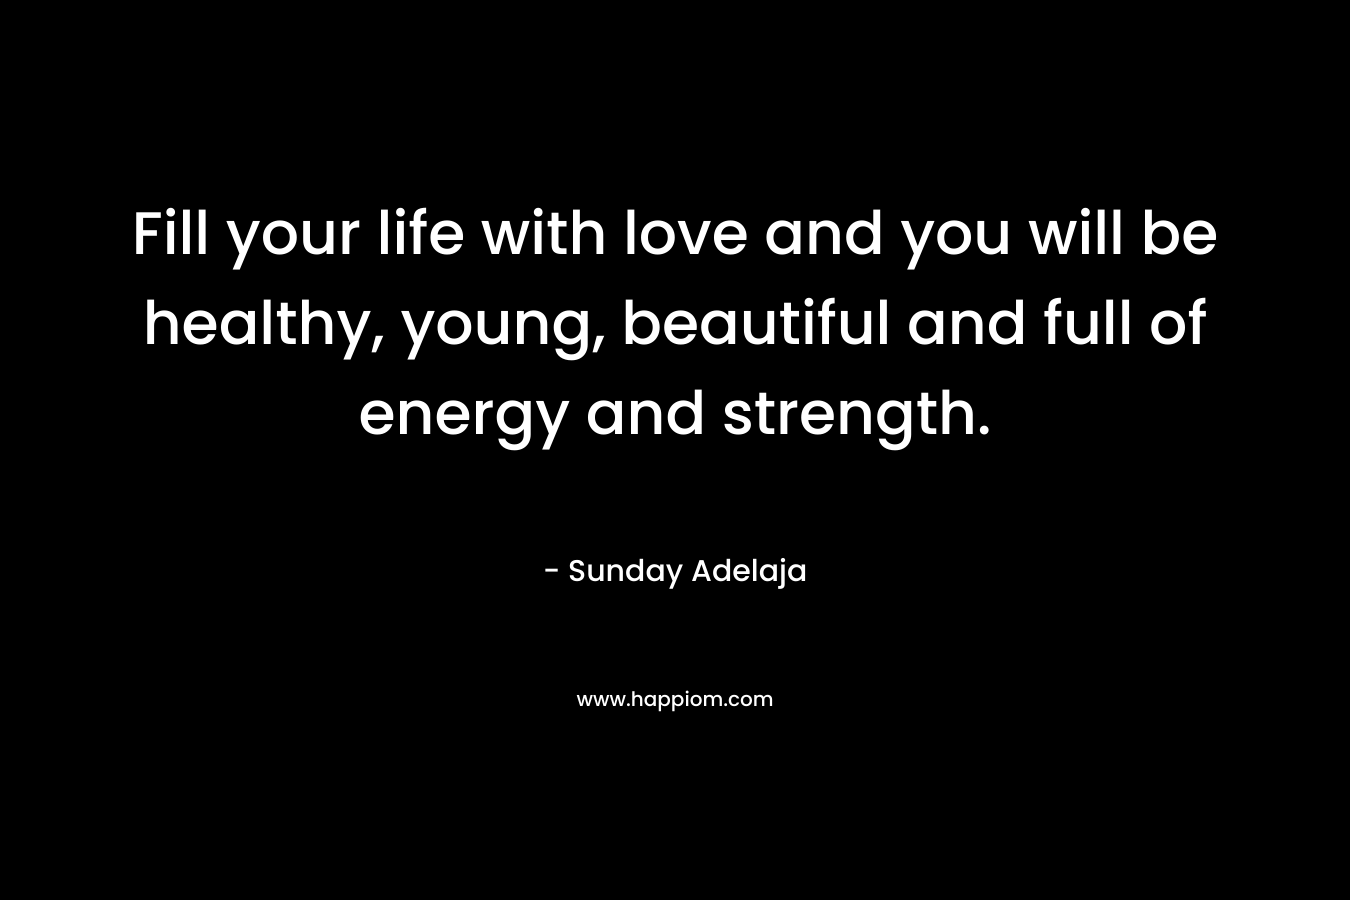 Fill your life with love and you will be healthy, young, beautiful and full of energy and strength.